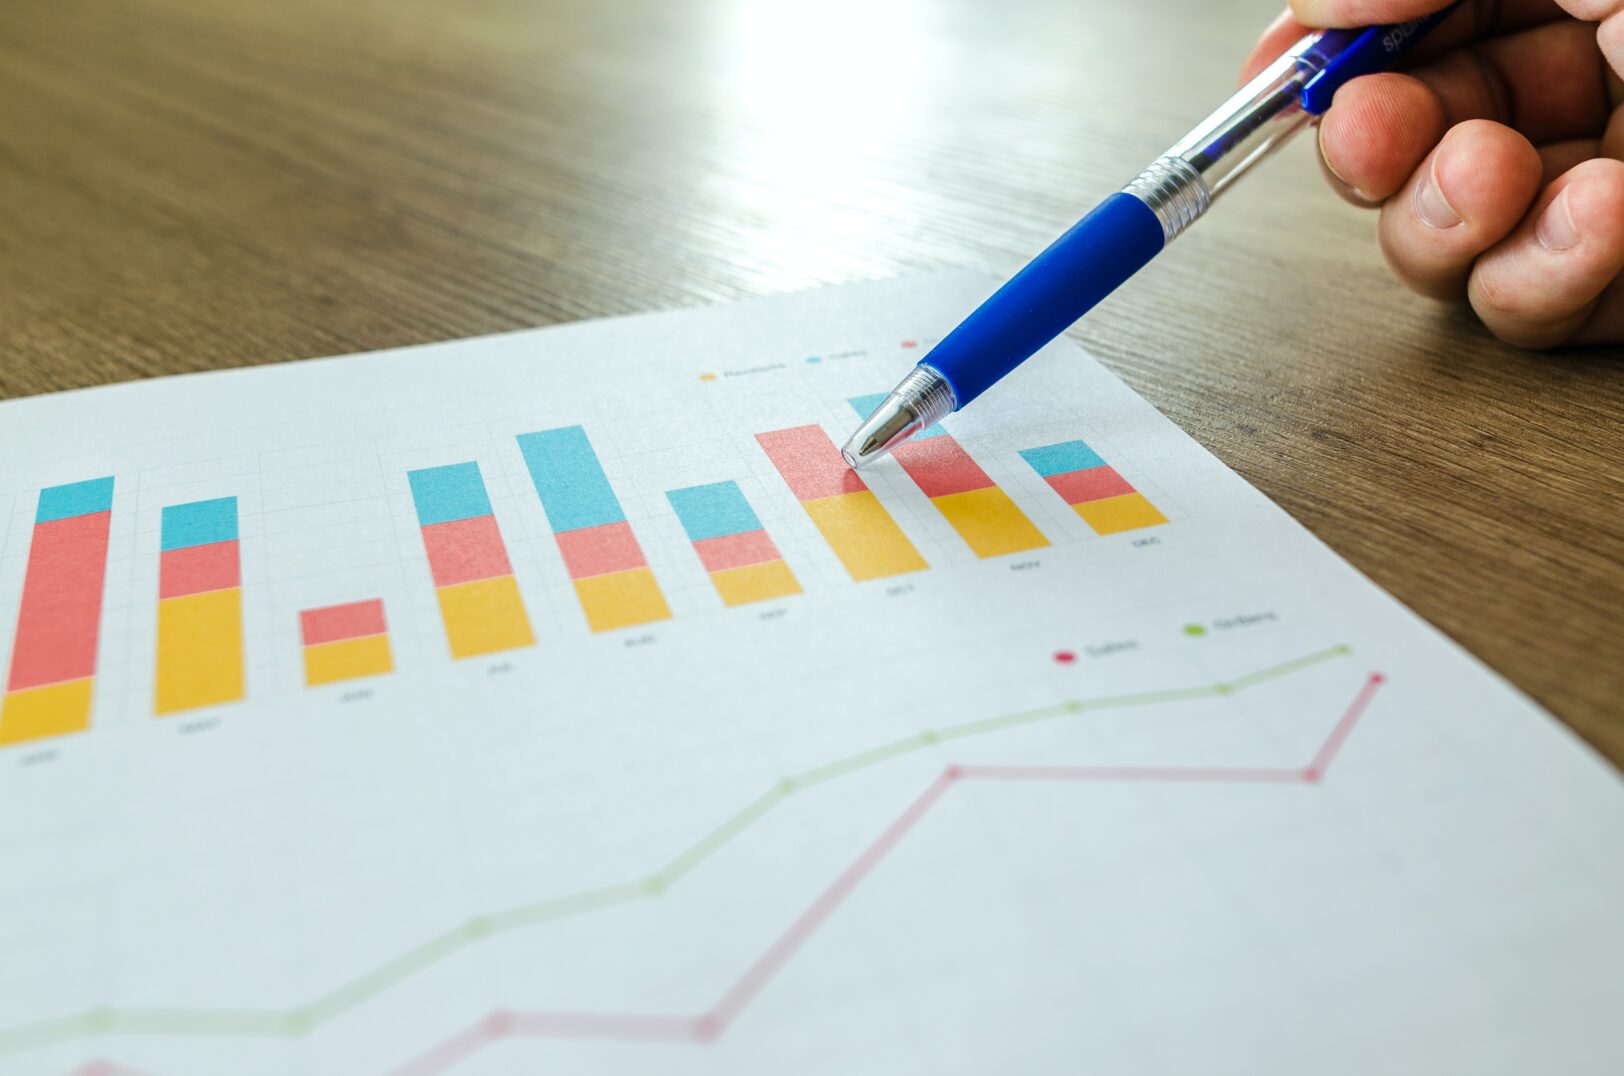 Data with charts and graph. Analyzing performance data helps guide your strategy.